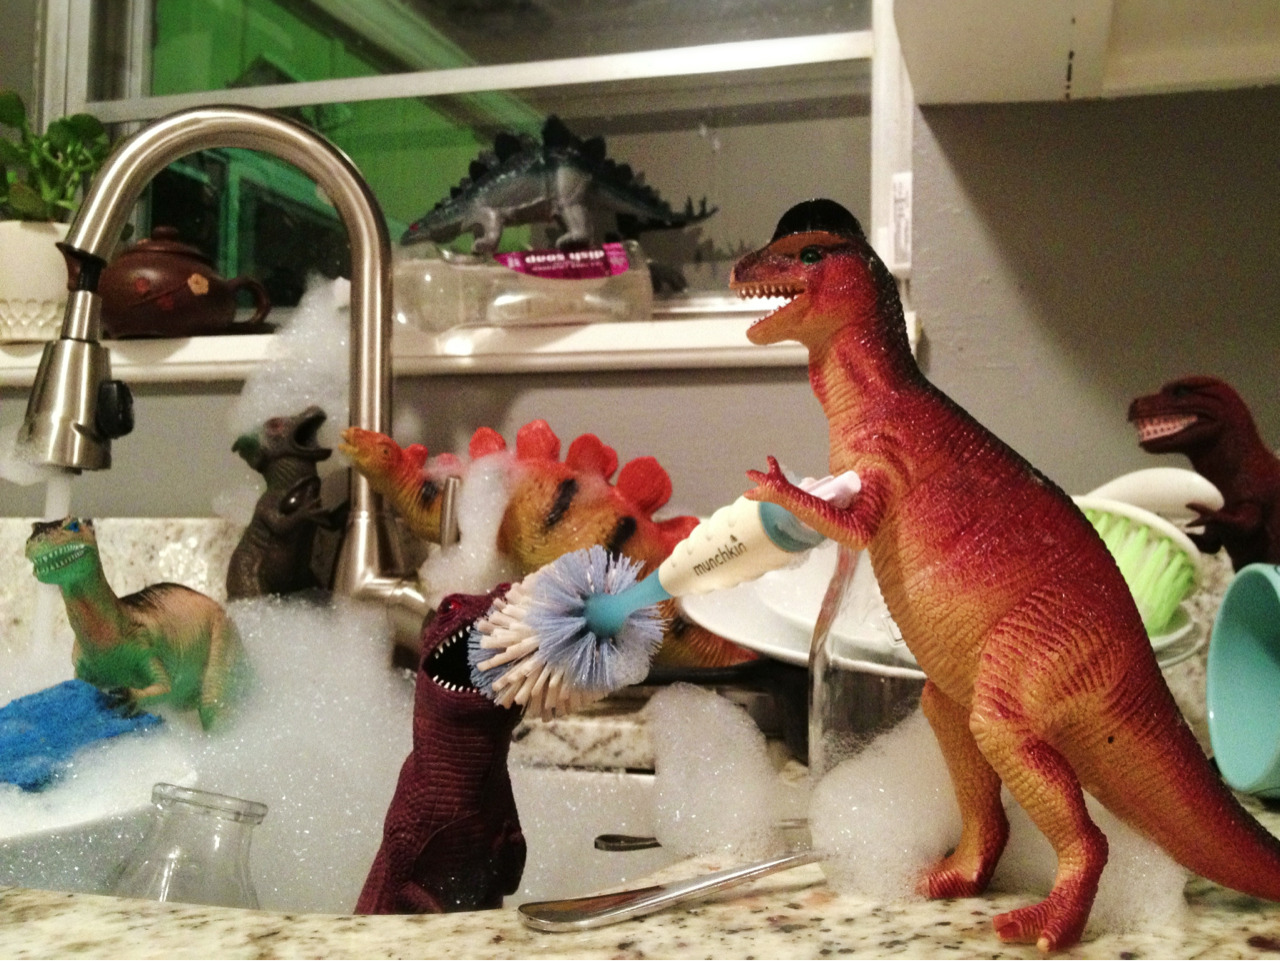 #Dinovember Day 16: Finally, the dinosaurs start contributing to the household.